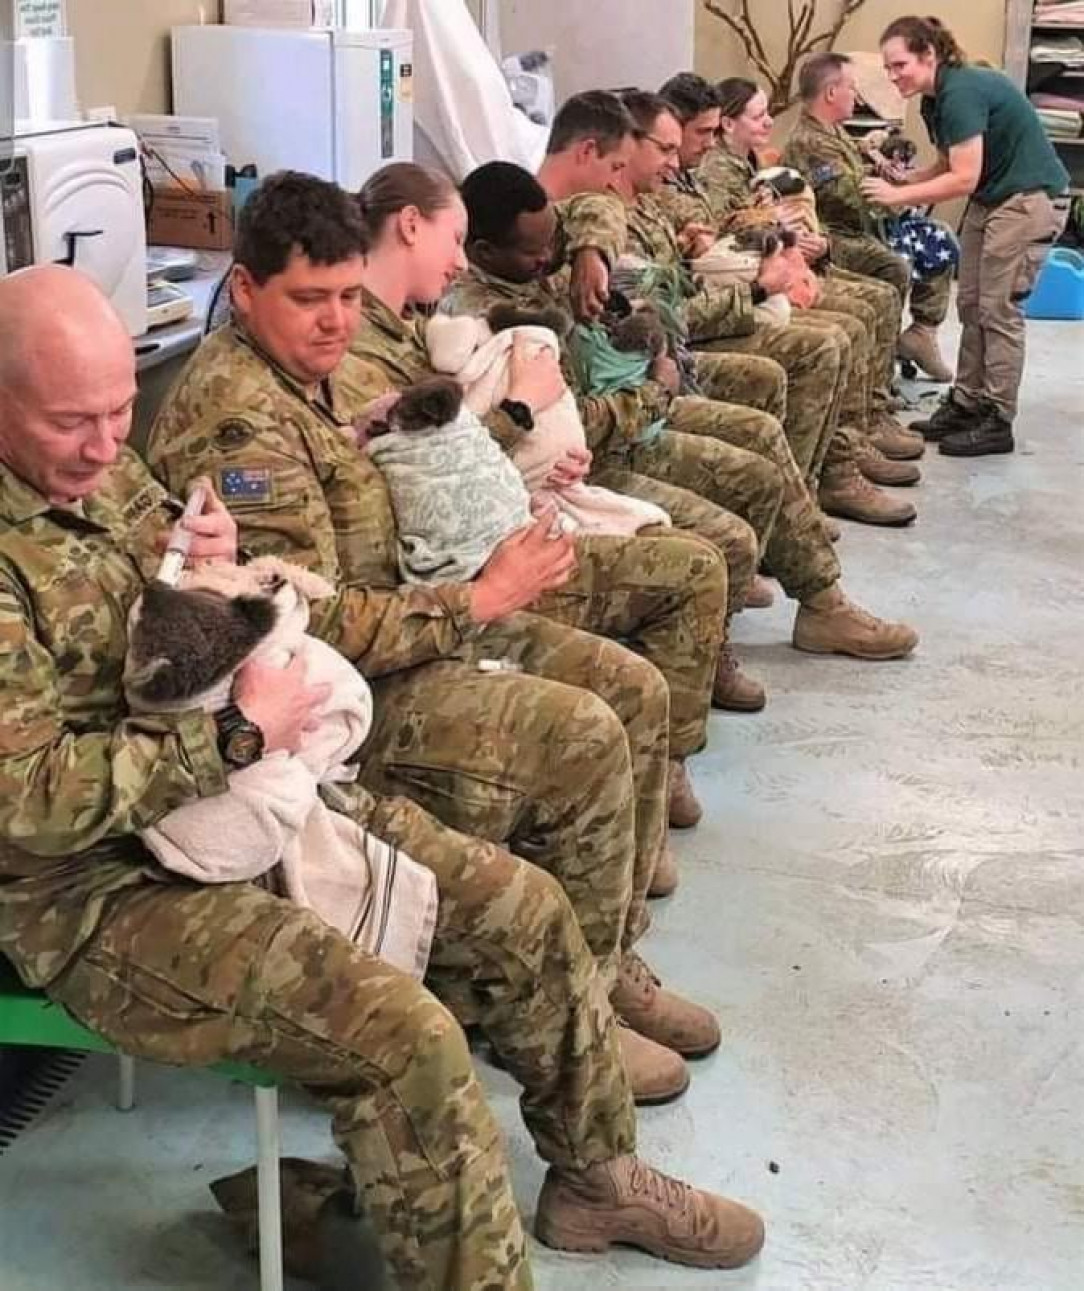 Australian soldiers are taking care of koala bears who were left alone and endangered after the fire